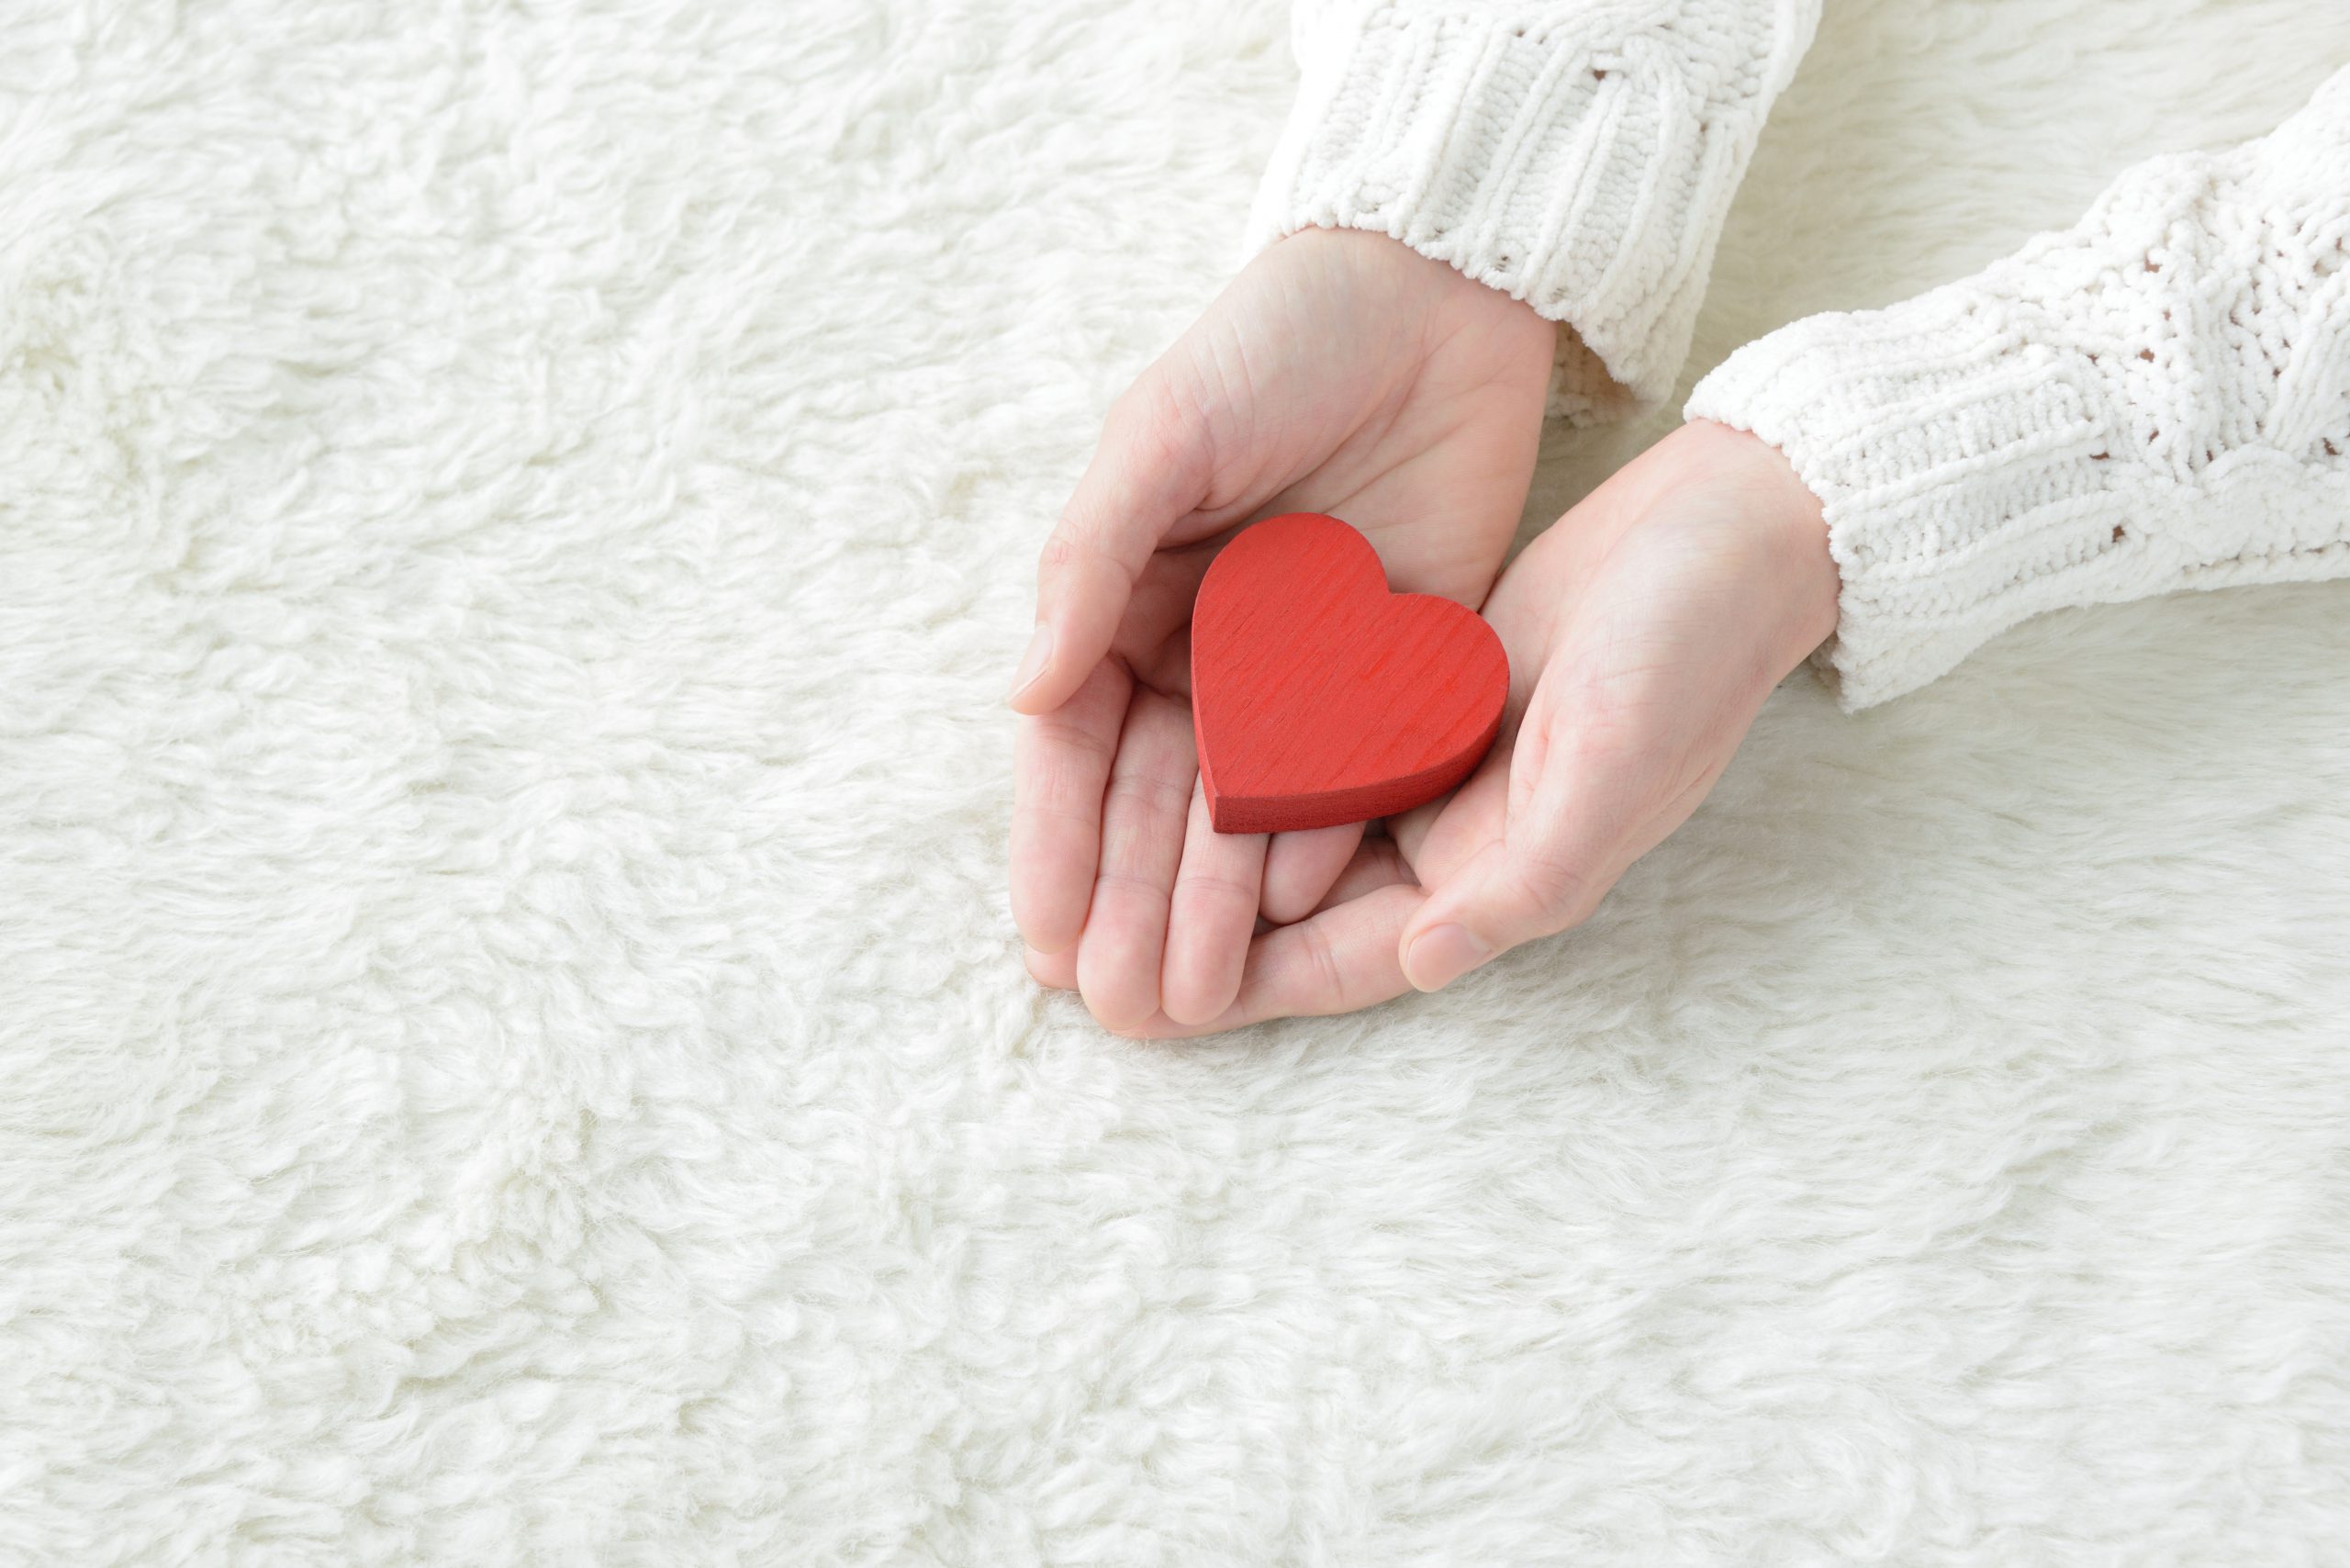 Hands holding a red toy heart